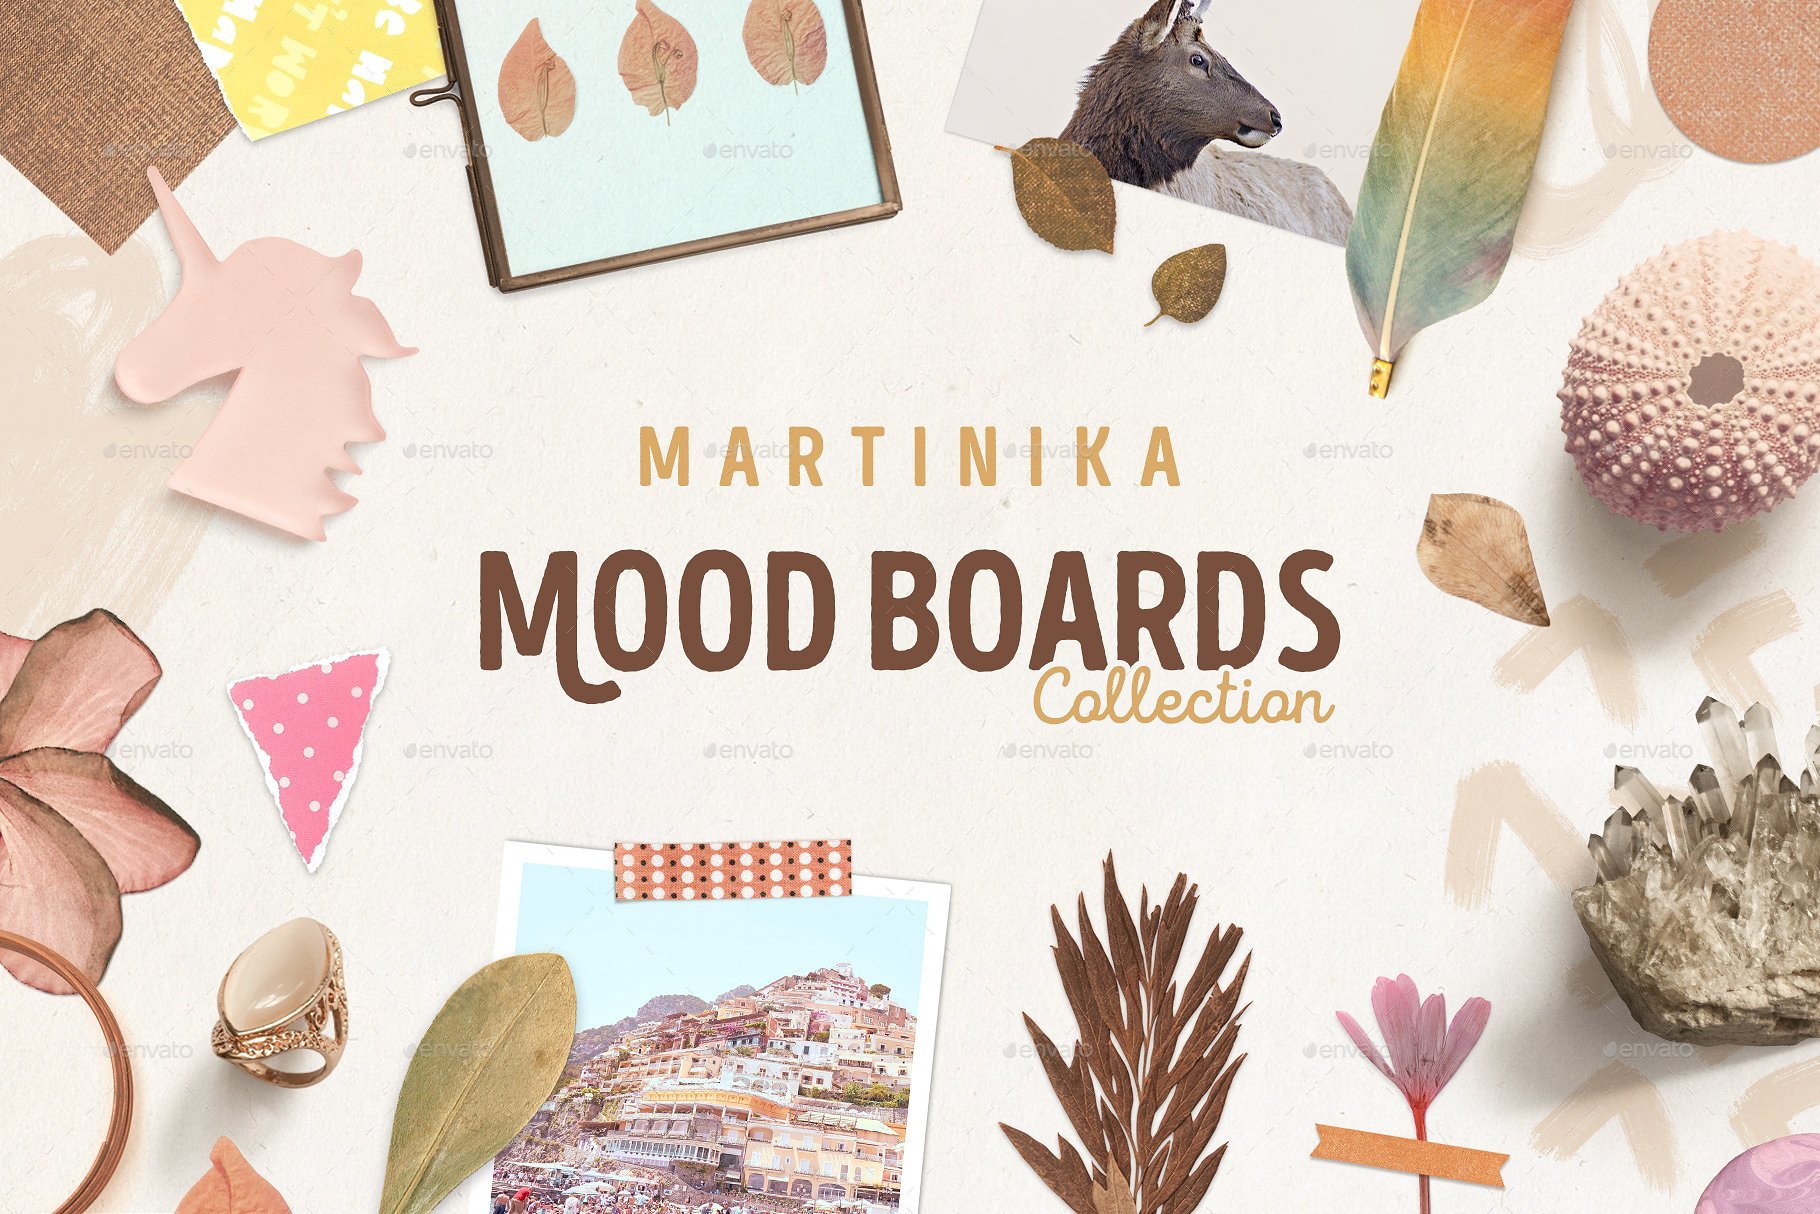 Download Martinika Mood Boards Collection by pixelbuddha_graphic | GraphicRiver